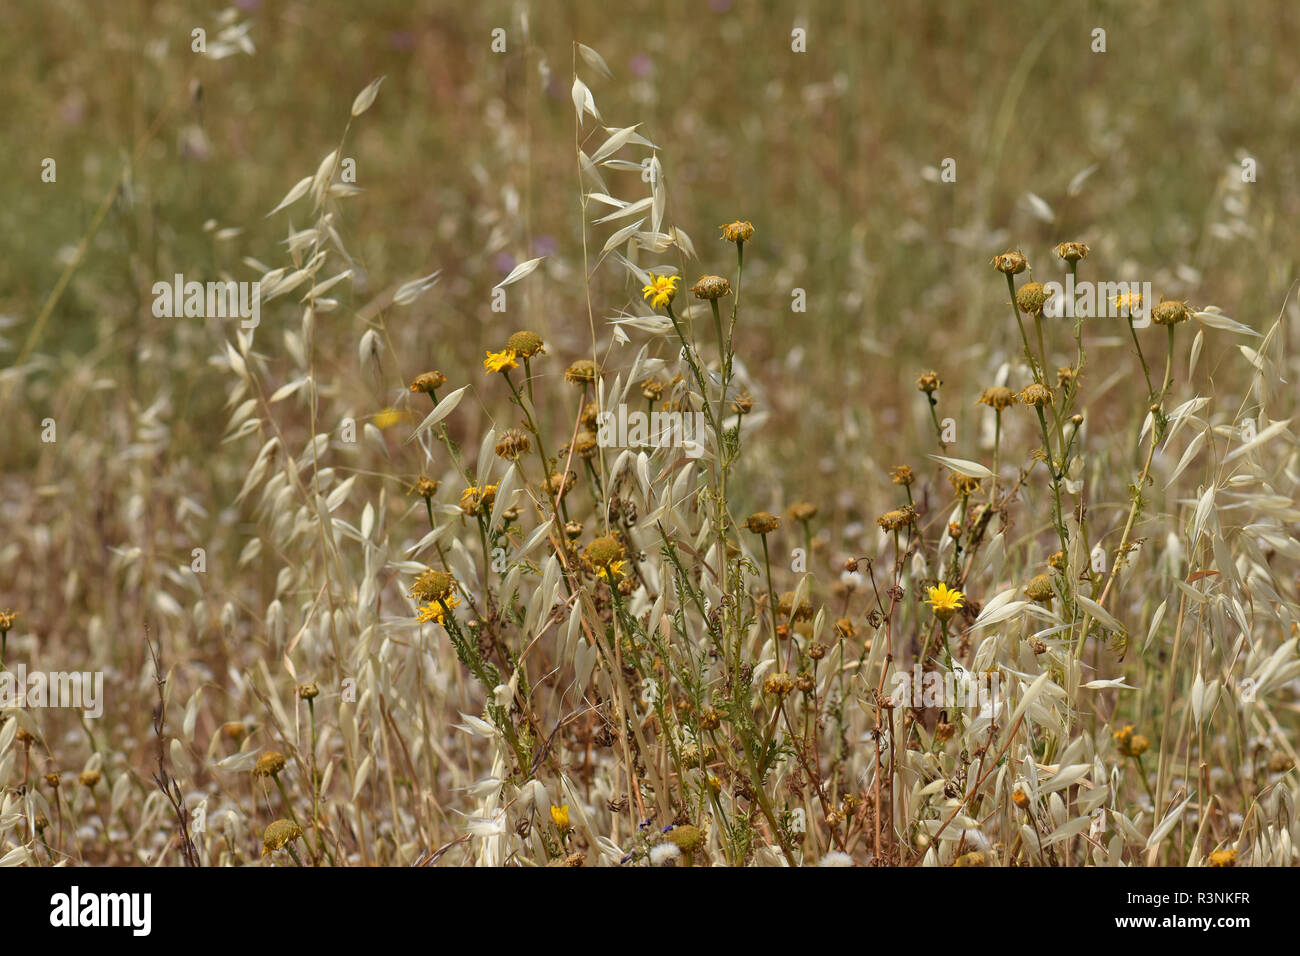 Withered wild flowers and overgrown dry oat straw plants. Spring turns to summer. Stock Photo